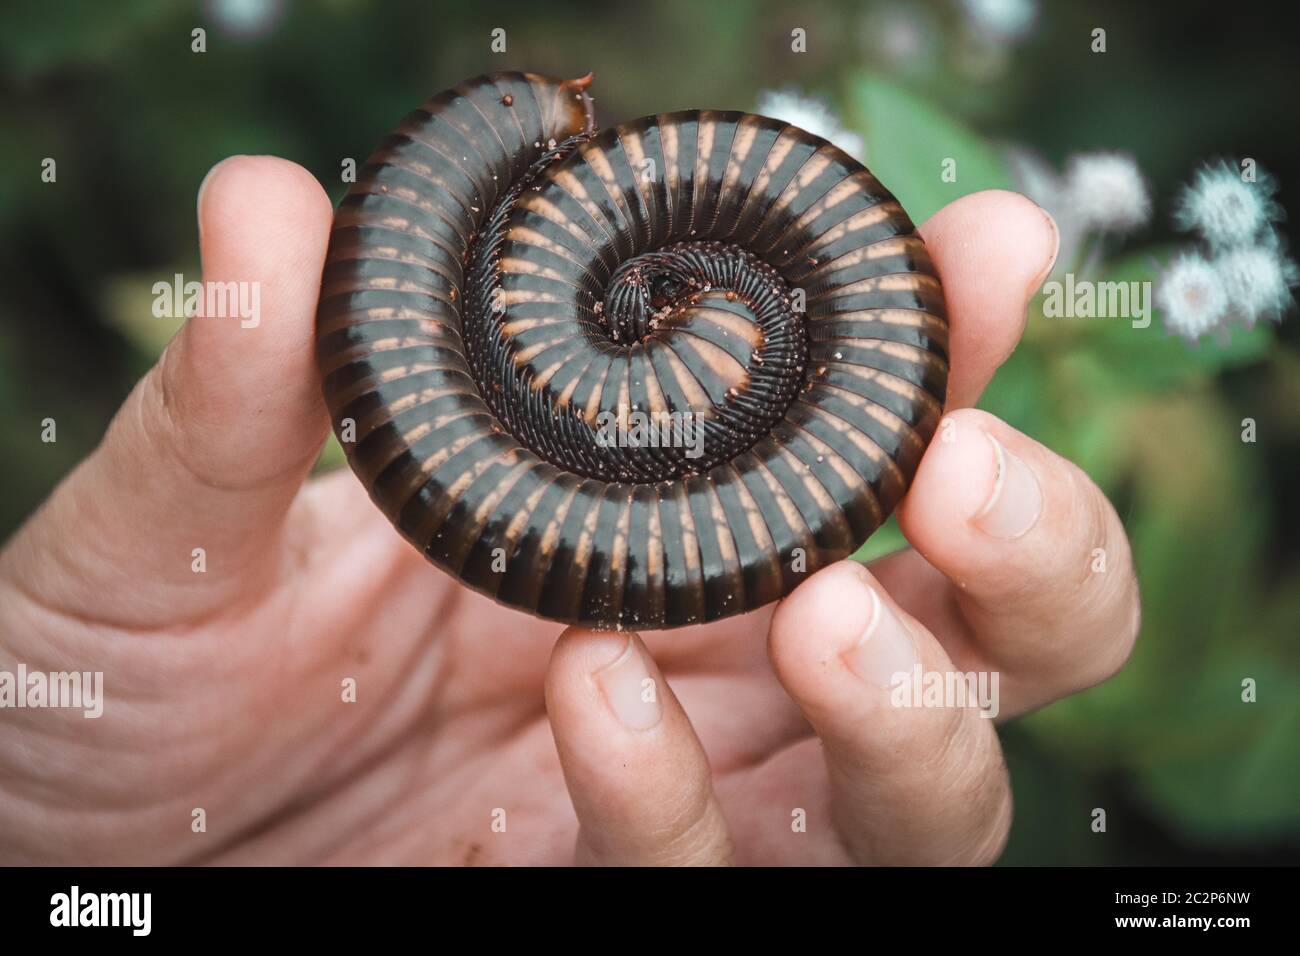 Holding a Asian giant millipede or Thyropygus spirobolinae sp, showing concept of kindness, harmony with nature and environmentalism Stock Photo